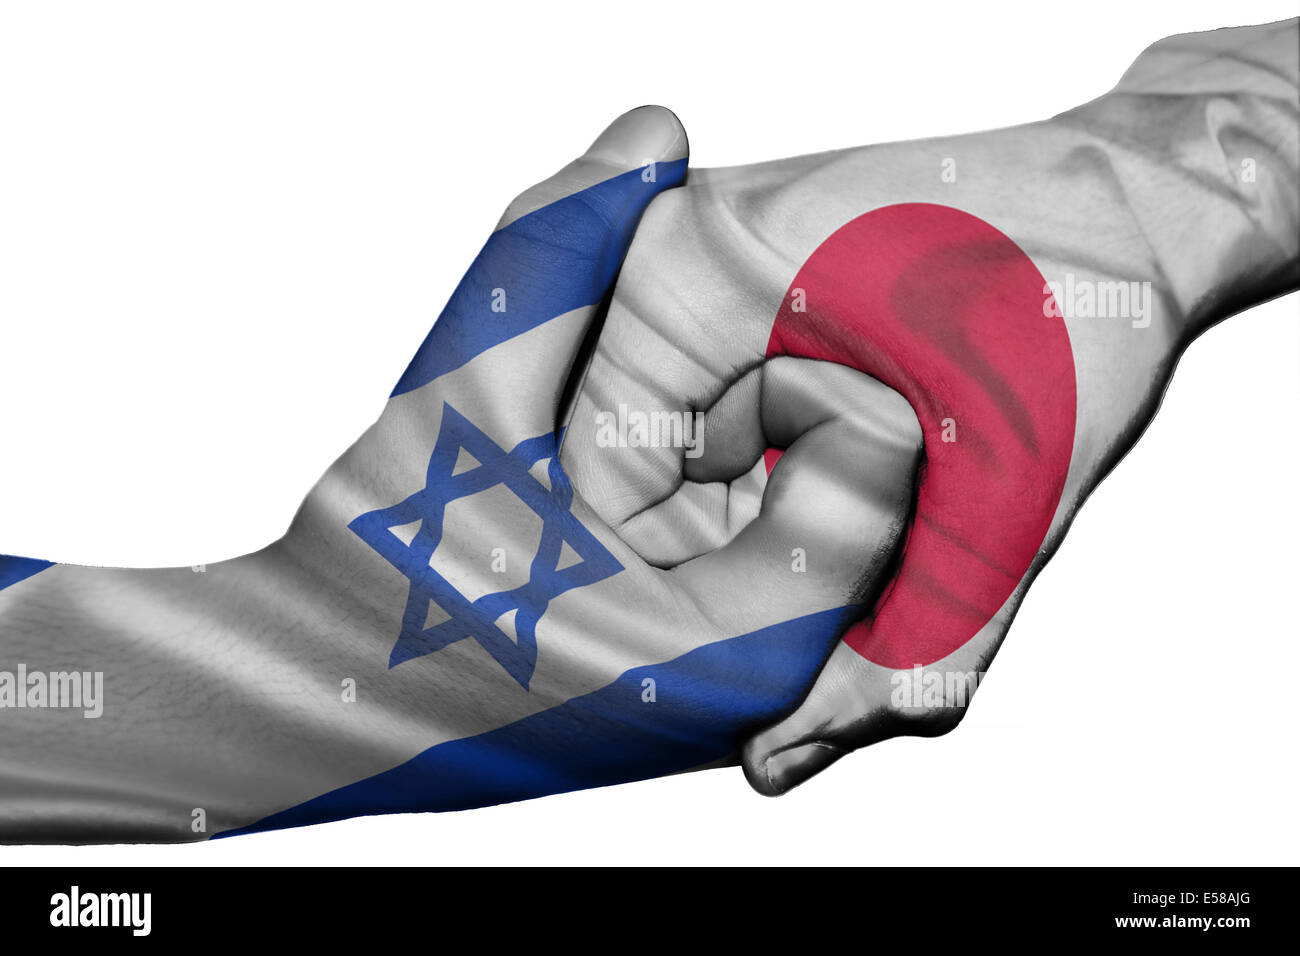 Diplomatic handshake between countries: flags of Israel and Japan overprinted the two hands Stock Photo